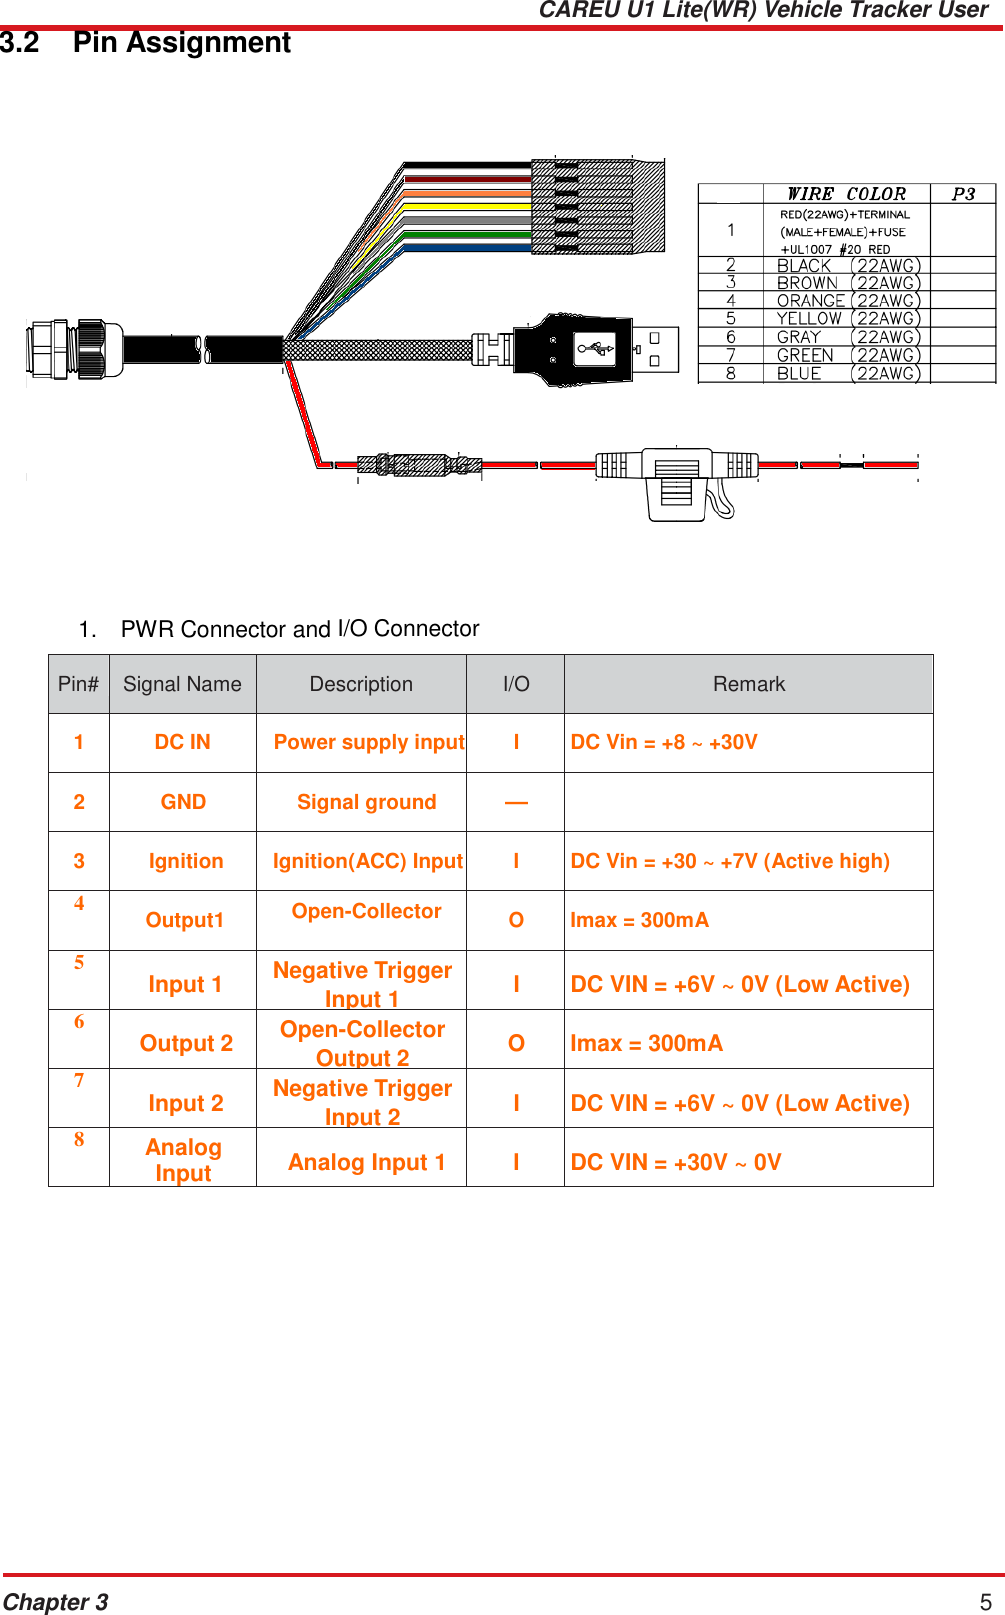 CAREU U1 Lite(WR) Vehicle Tracker User Guide Chapter 3 5    Pin#  Signal Name  Description  I/O  Remark  1  DC IN  Power supply input  I  DC Vin = +8 ~ +30V  2  GND  Signal ground  —   3  Ignition  Ignition(ACC) Input  I  DC Vin = +30 ~ +7V (Active high) 4  Output1 Open-Collector  O  Imax = 300mA 5  Input 1 Negative Trigger Input 1  I  DC VIN = +6V ~ 0V (Low Active) 6  Output 2 Open-Collector Output 2  O  Imax = 300mA 7  Input 2 Negative Trigger Input 2  I  DC VIN = +6V ~ 0V (Low Active) 8 Analog Input 1  Analog Input 1  I  DC VIN = +30V ~ 0V  3.2  Pin Assignment   1.  PWR Connector and I/O Connector  